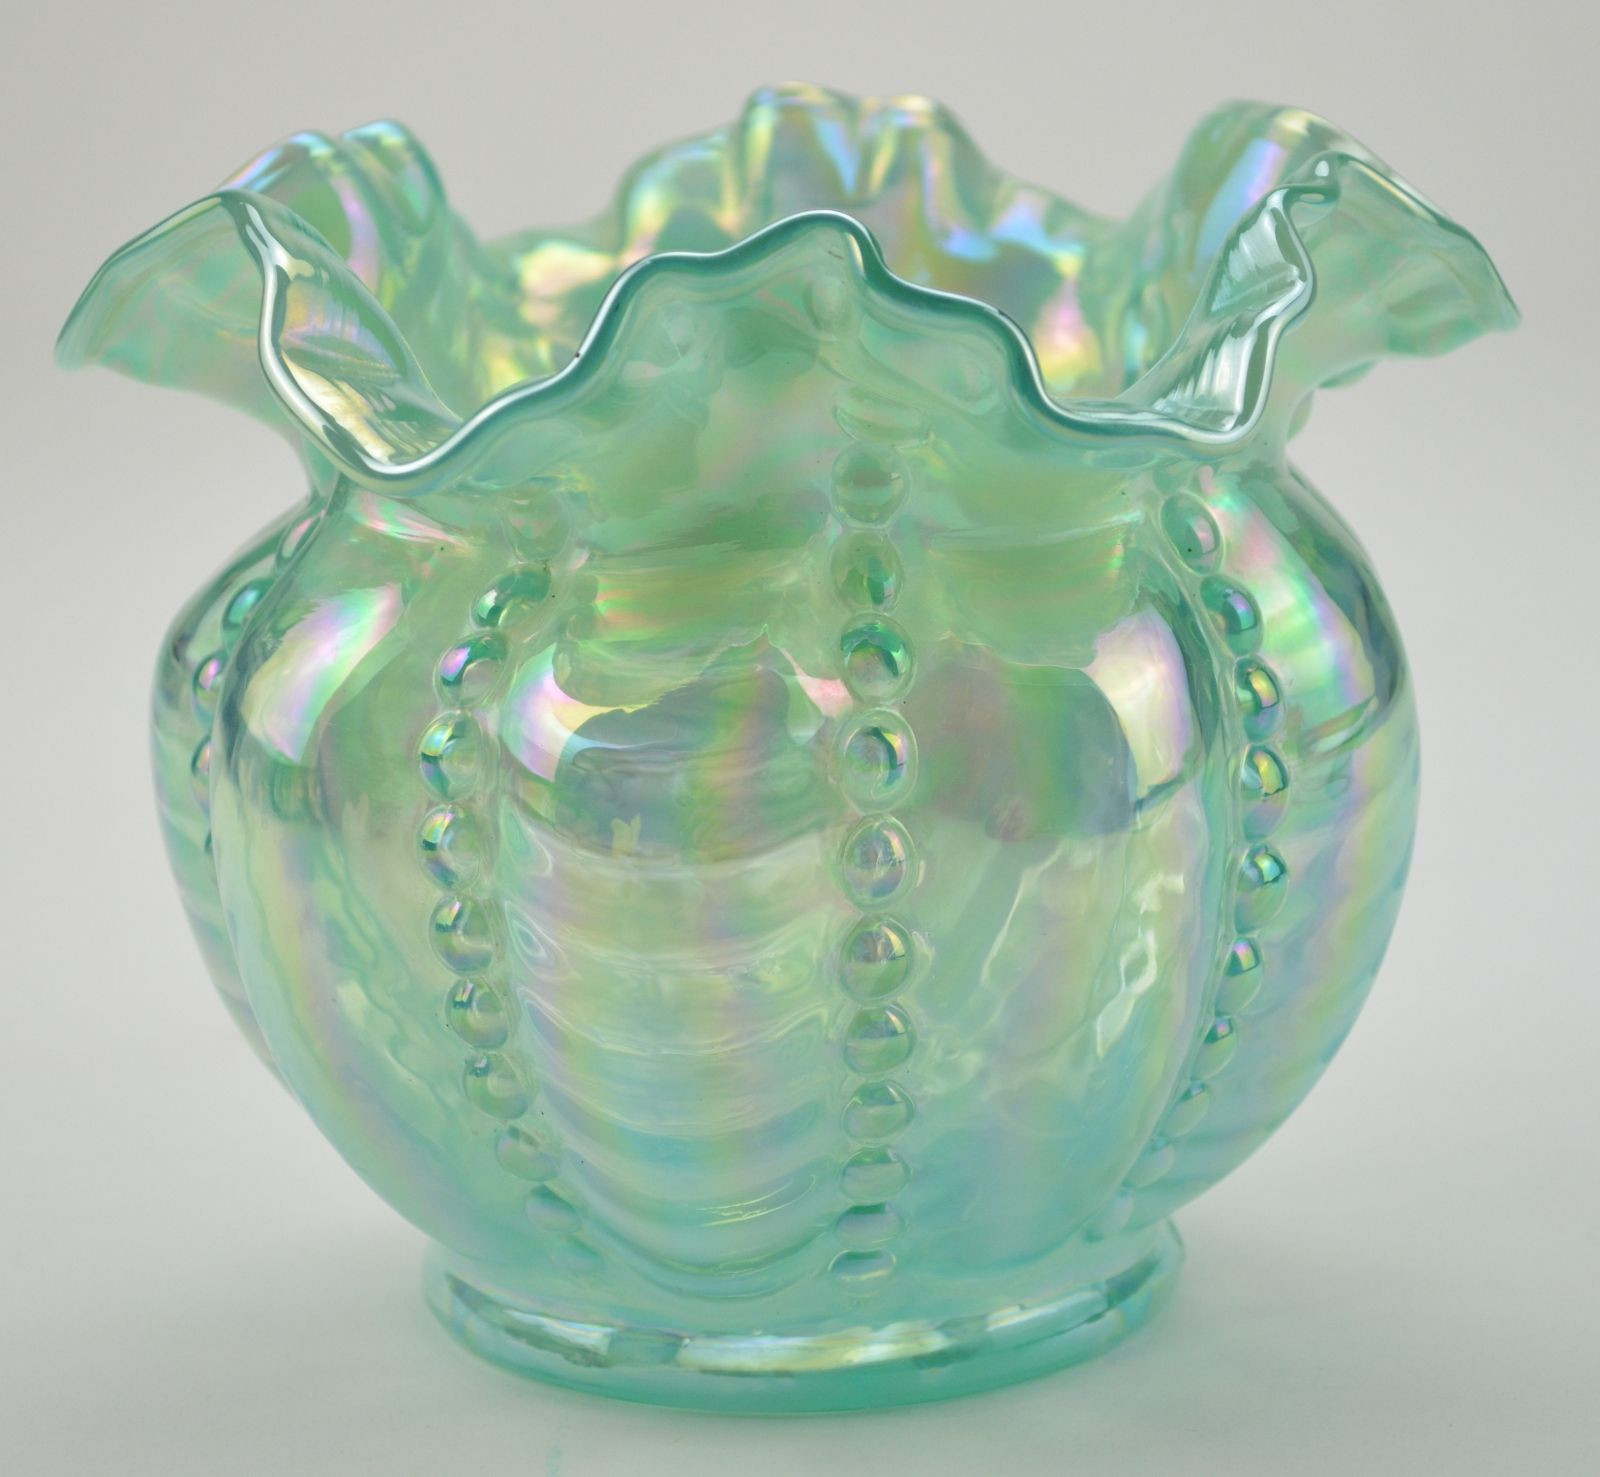 10 Nice atlantis Crystal Vase 2024 free download atlantis crystal vase of when it comes to glass it doesnt get much better than fe for fenton art glass carnvial aqua ruffle top vase collecitble iridescent